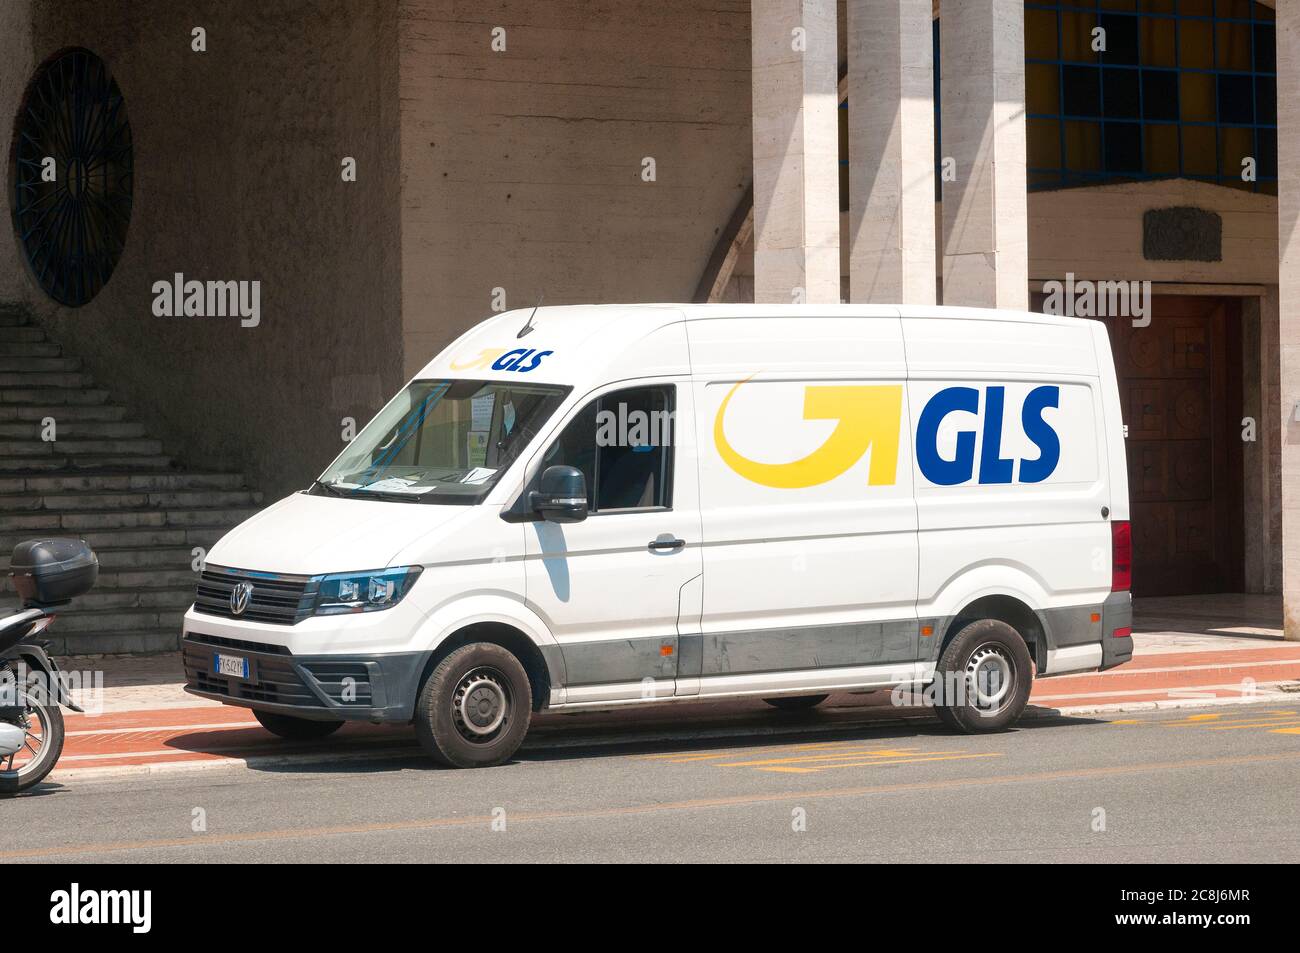 La Spezia, Italy - July 23, 2020 - A GLS (general logistics systems) express courier van parked in the city during a delivery Stock Photo